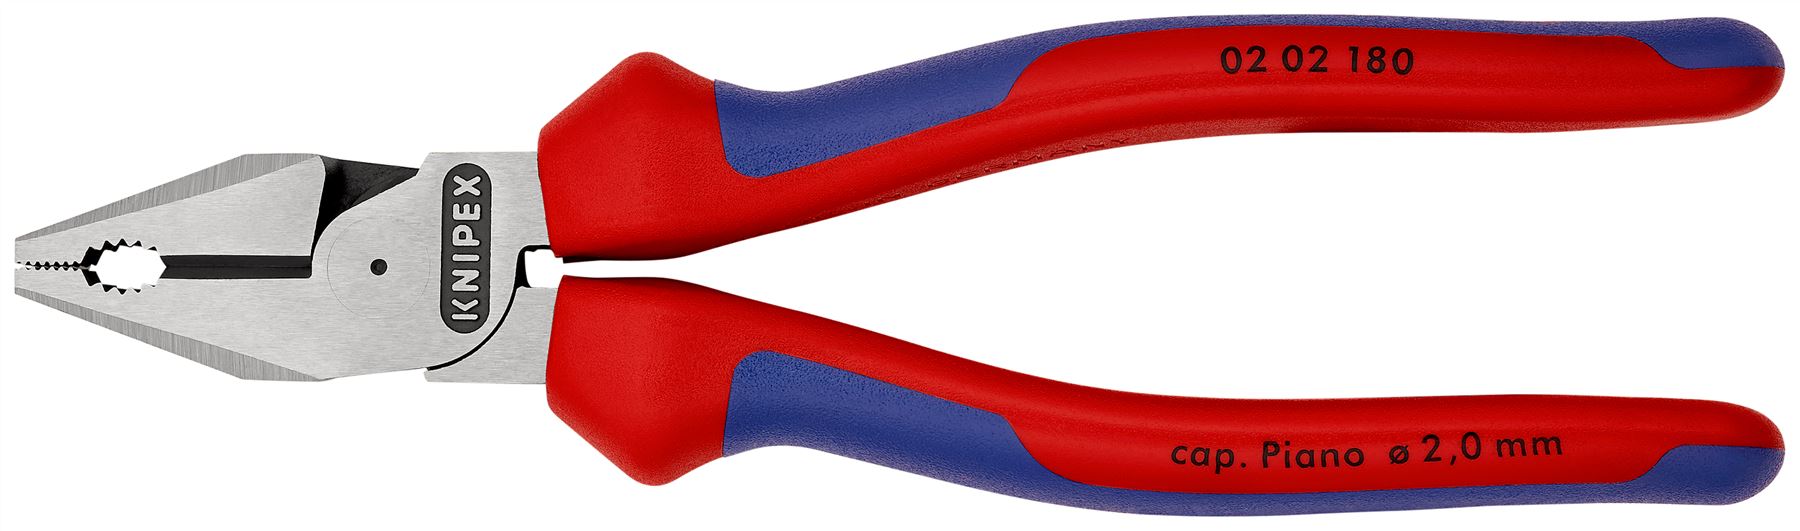 KNIPEX Combination Pliers High Leverage 180mm Multi Component Grips 02 02 180